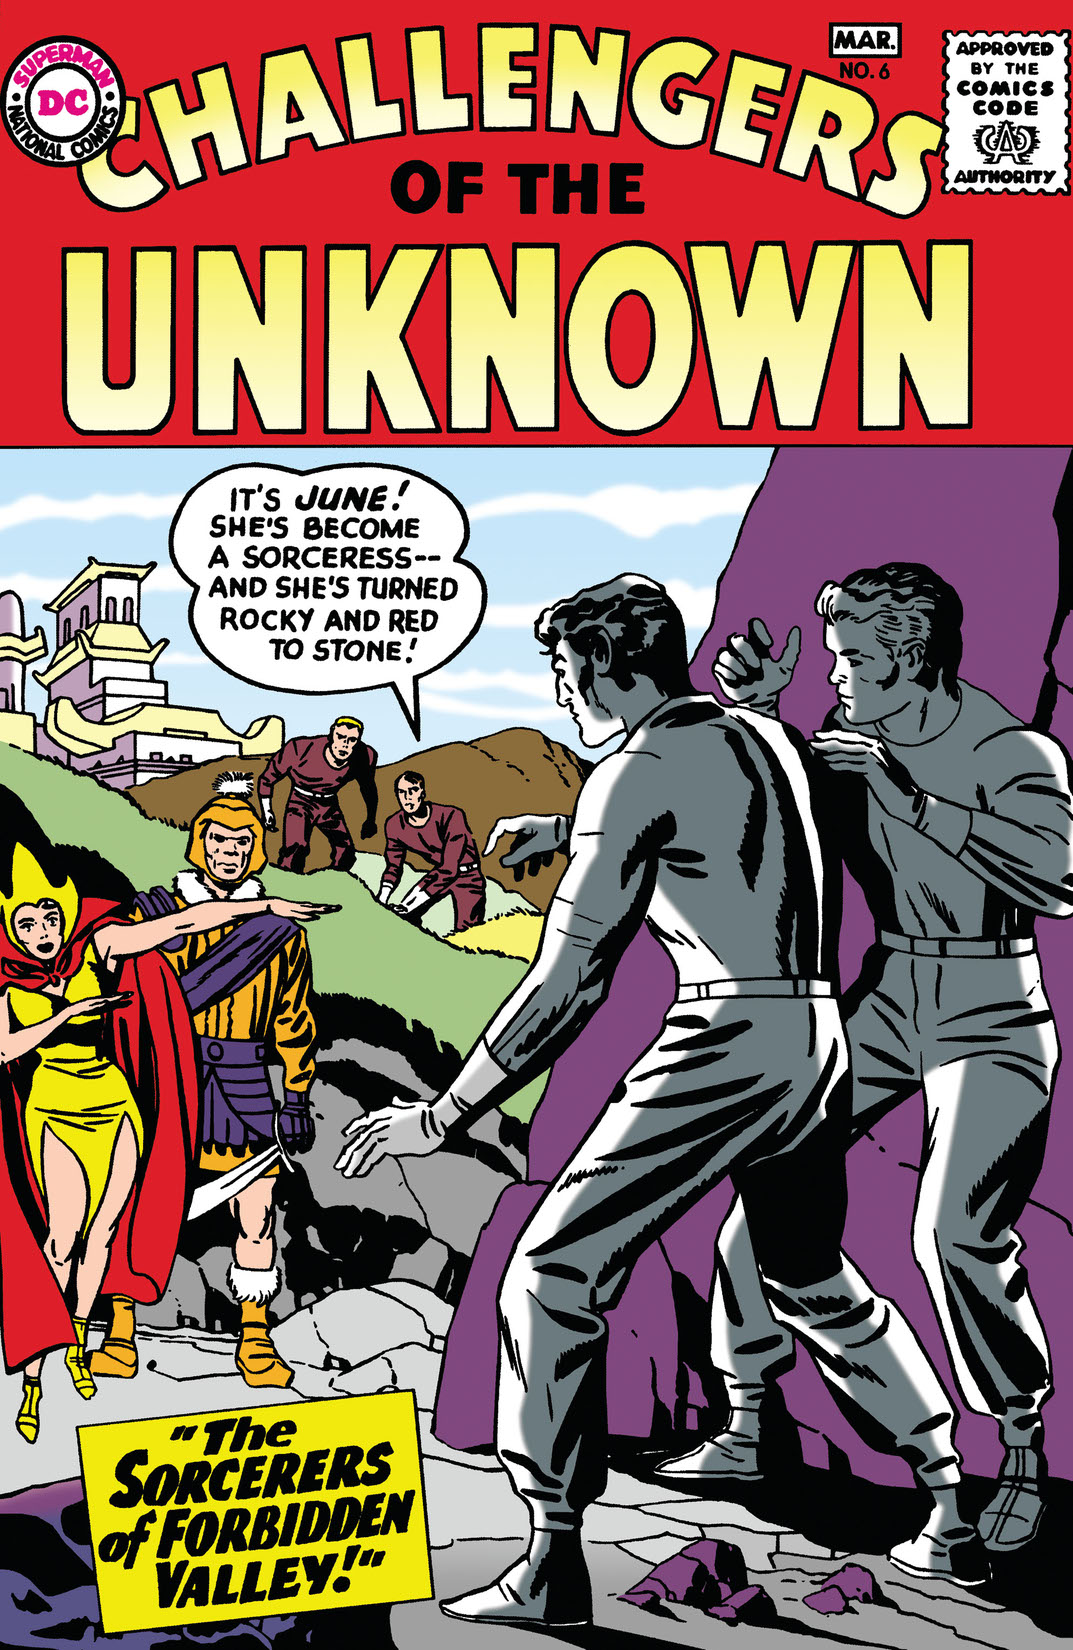 Challengers of the Unknown (1958-) #6 preview images